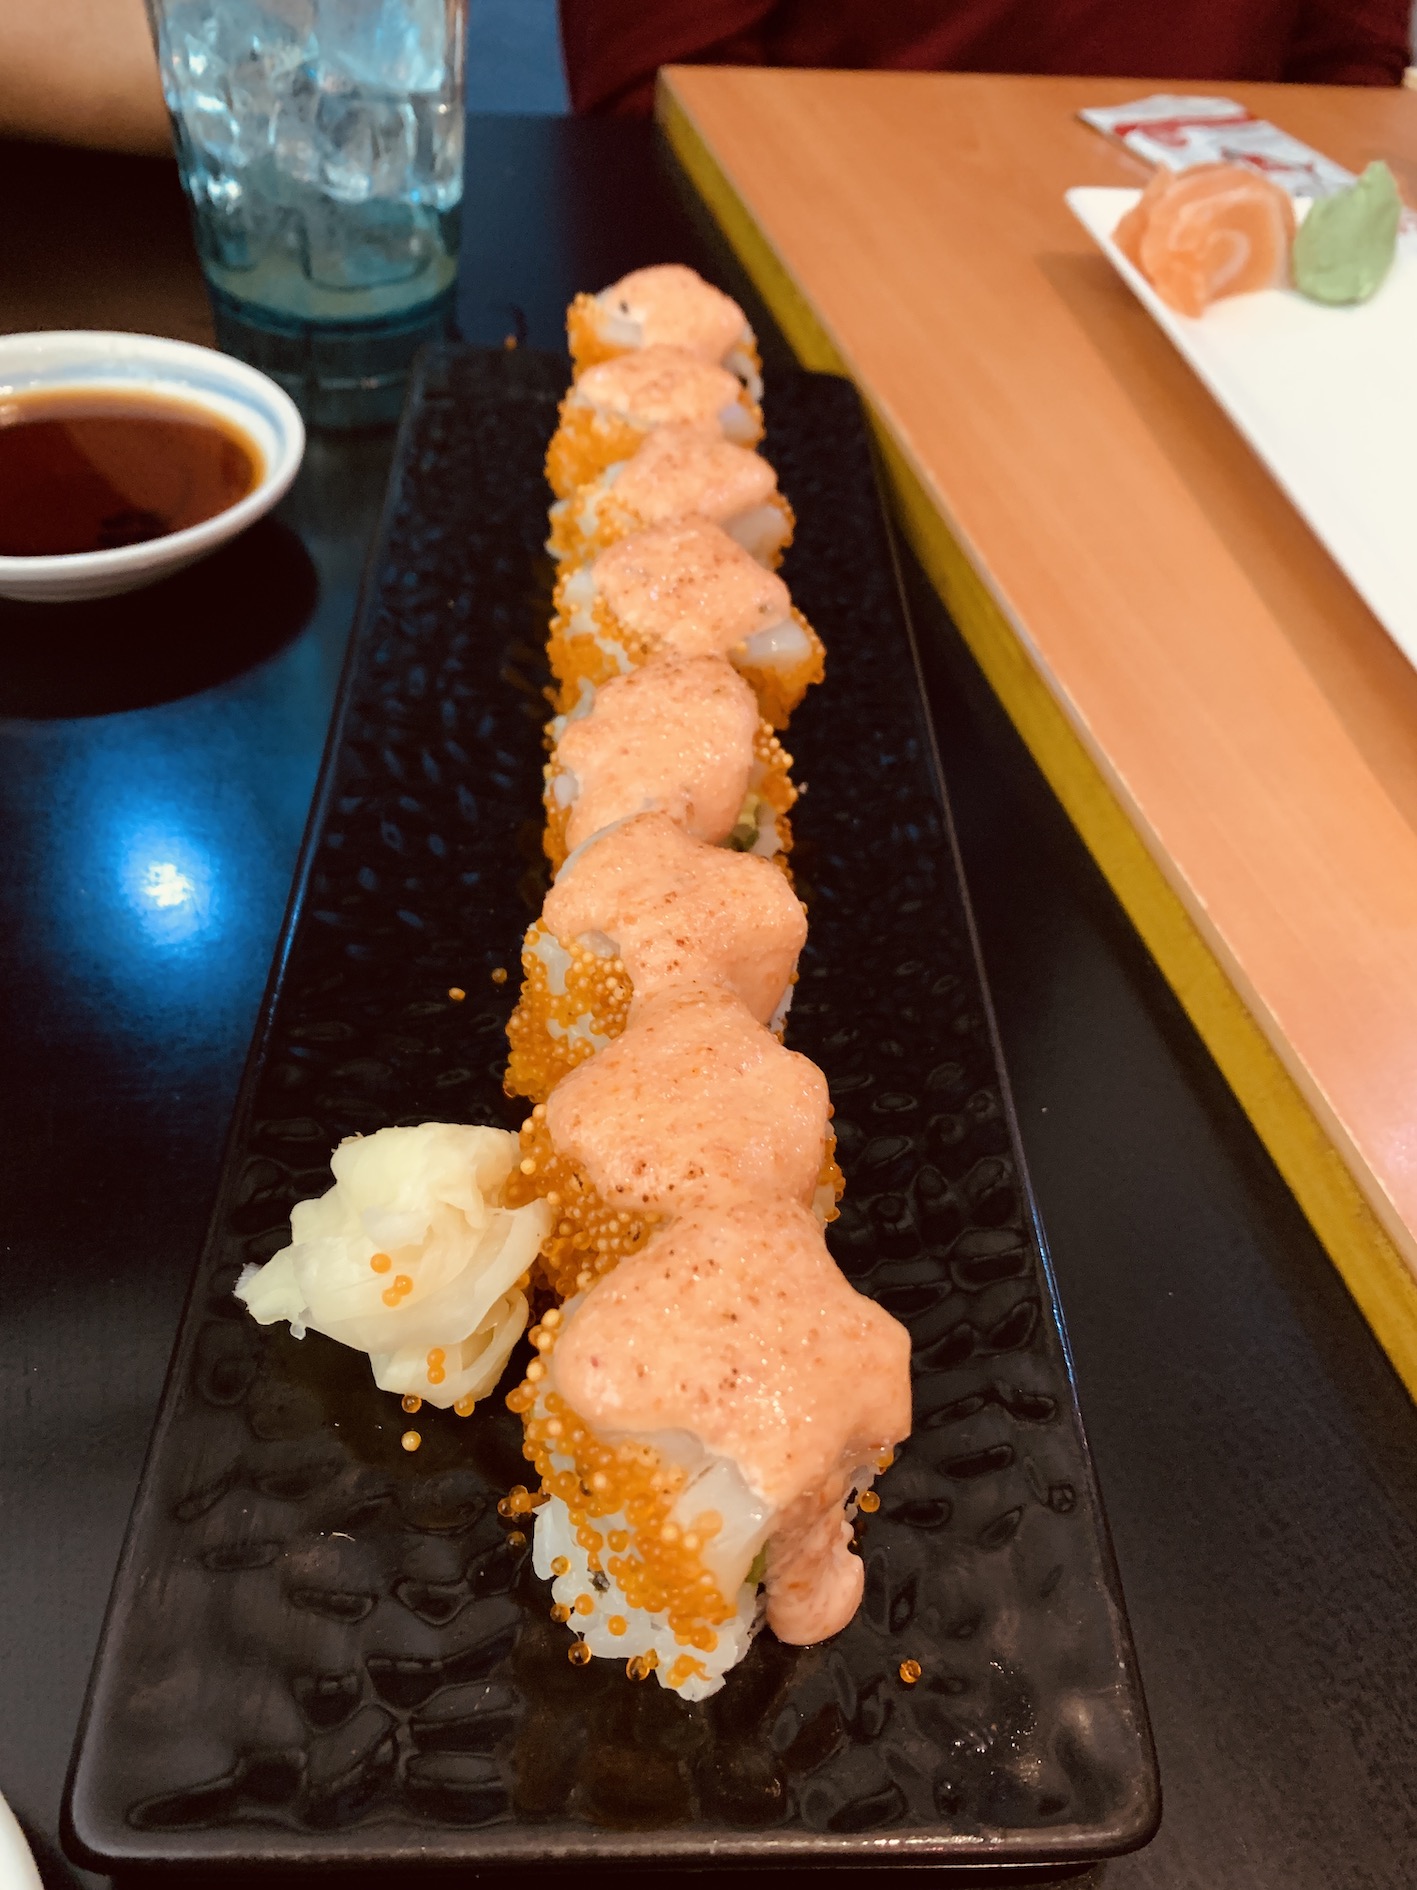 Standing Sushi Bar - Spicy Salmon Roll